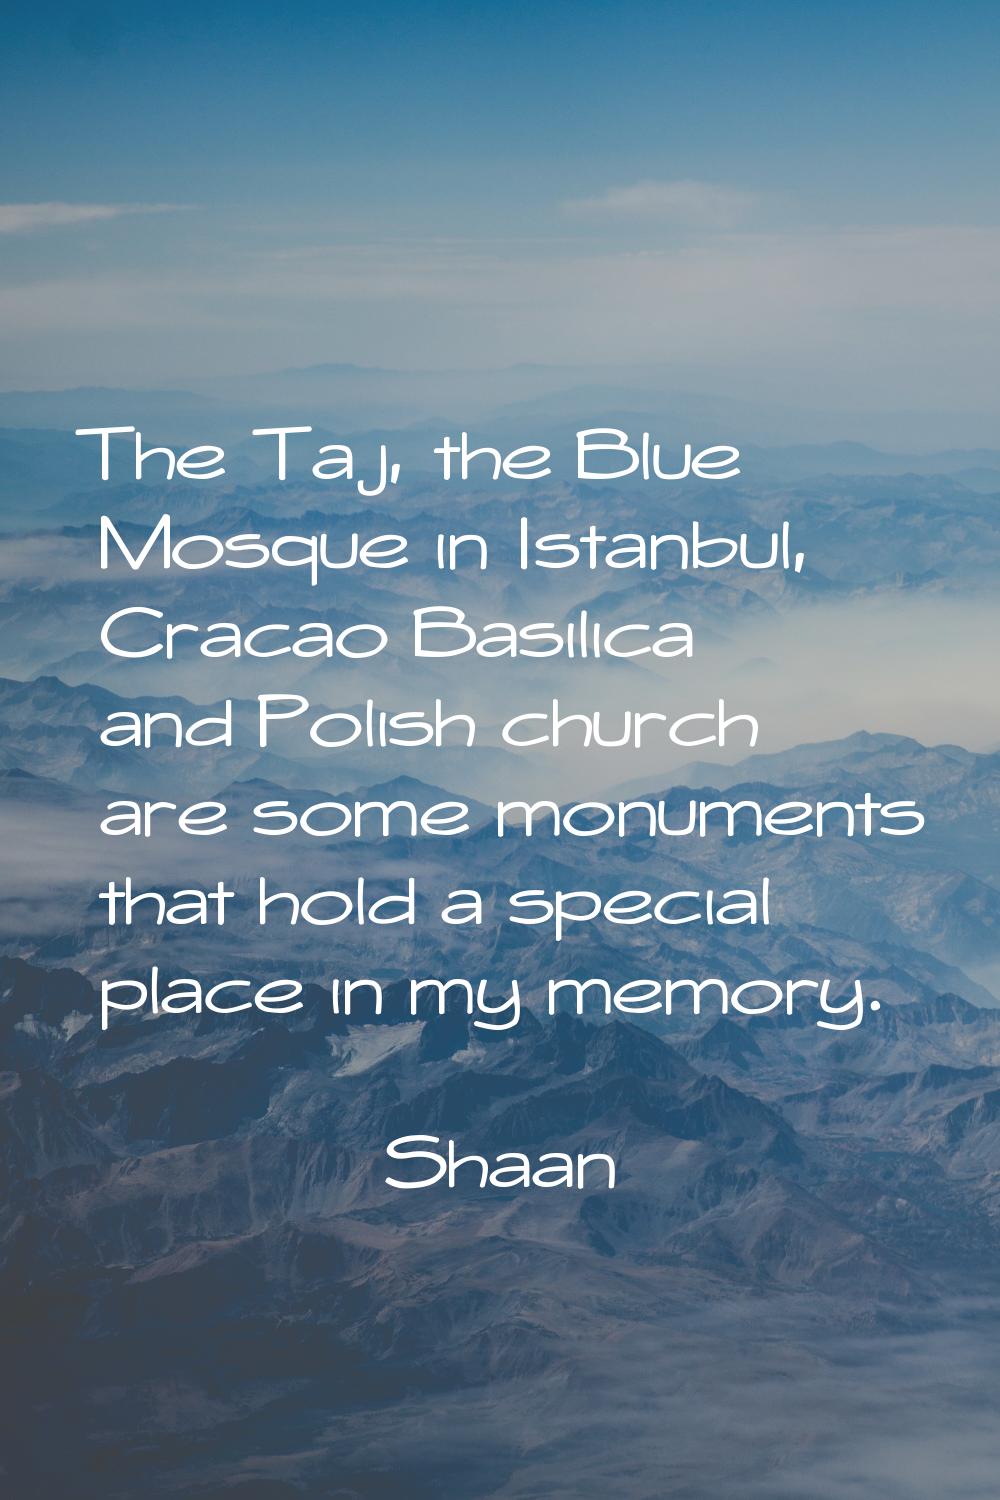 The Taj, the Blue Mosque in Istanbul, Cracao Basilica and Polish church are some monuments that hol